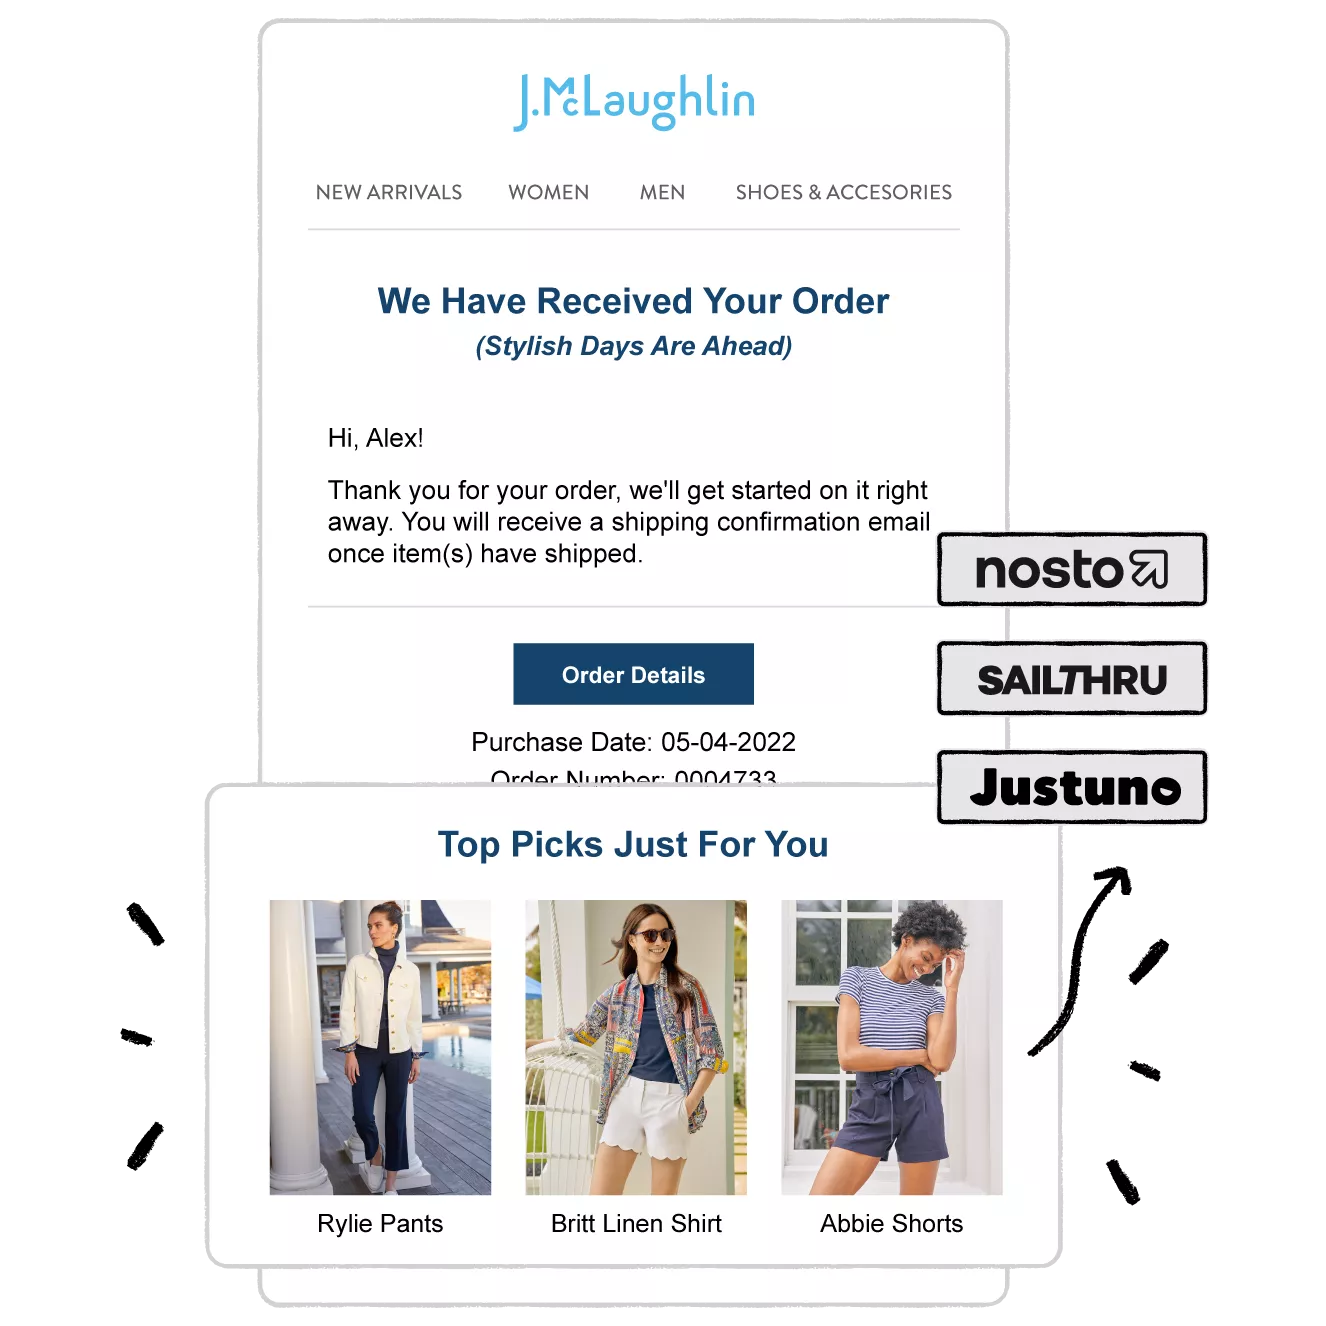 WeSupply JMcLaughlin Recommended Products